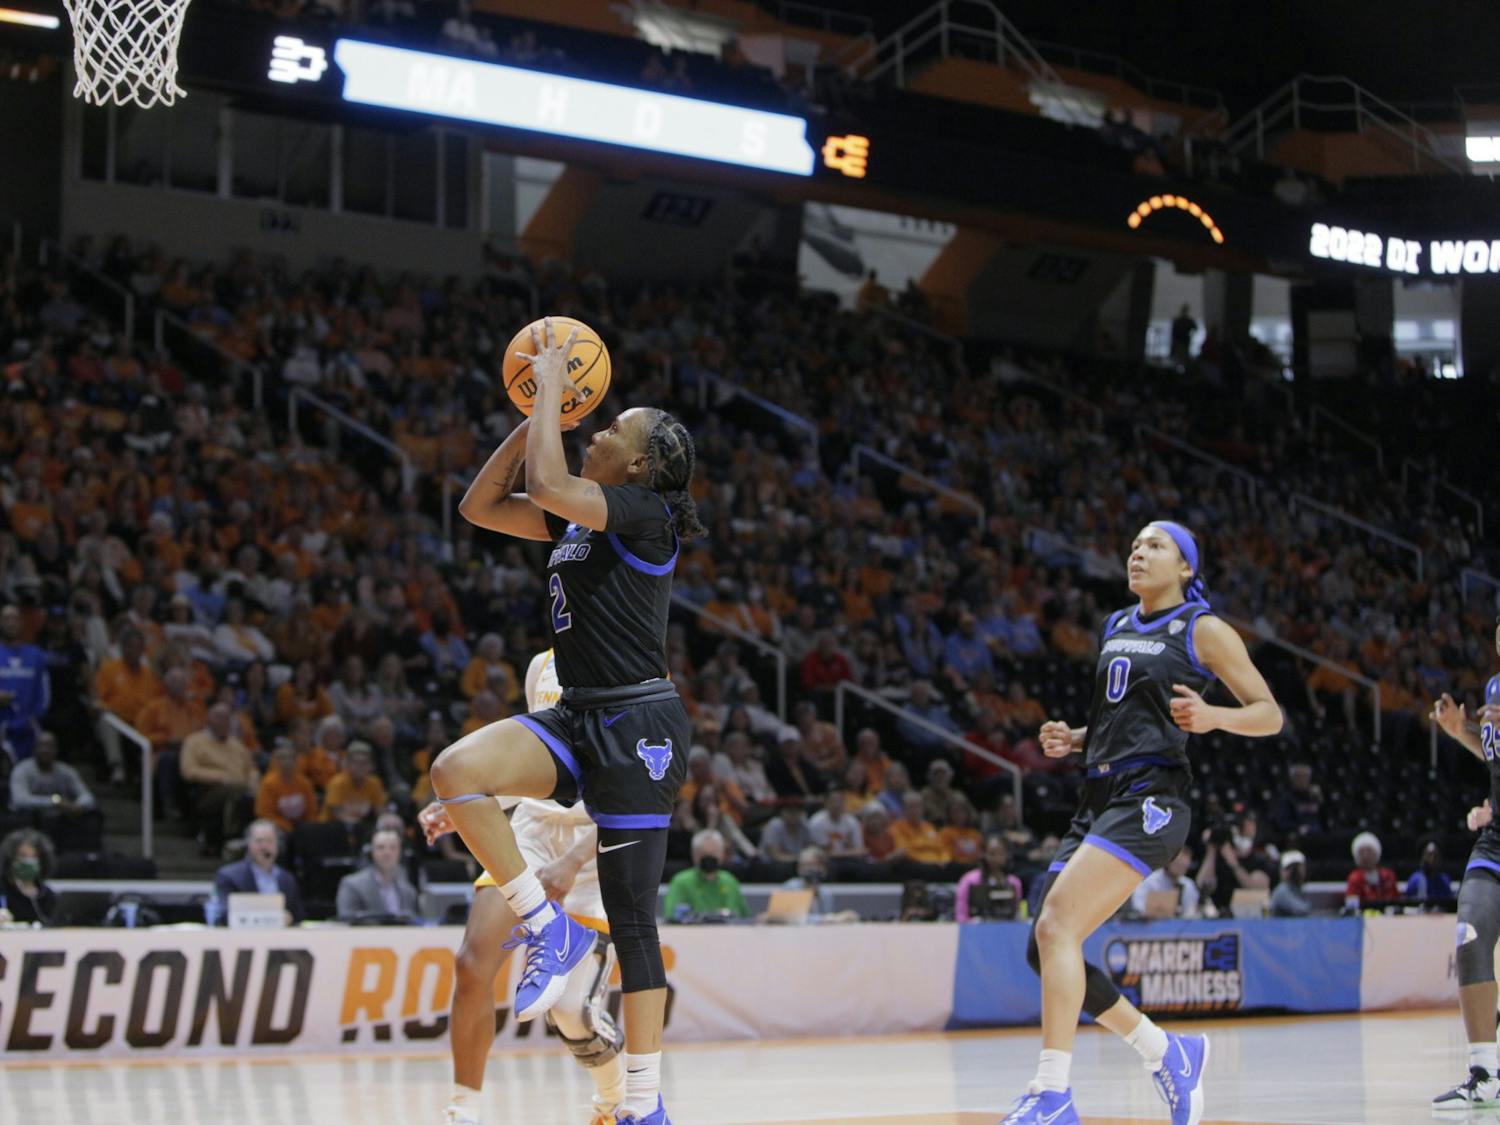 Junior guard Dyaisha Fair attempts a layup Saturday against Tennessee. Fair had 25 points as UB fell to the Lady Vols in the first round of the NCAA Tournament.